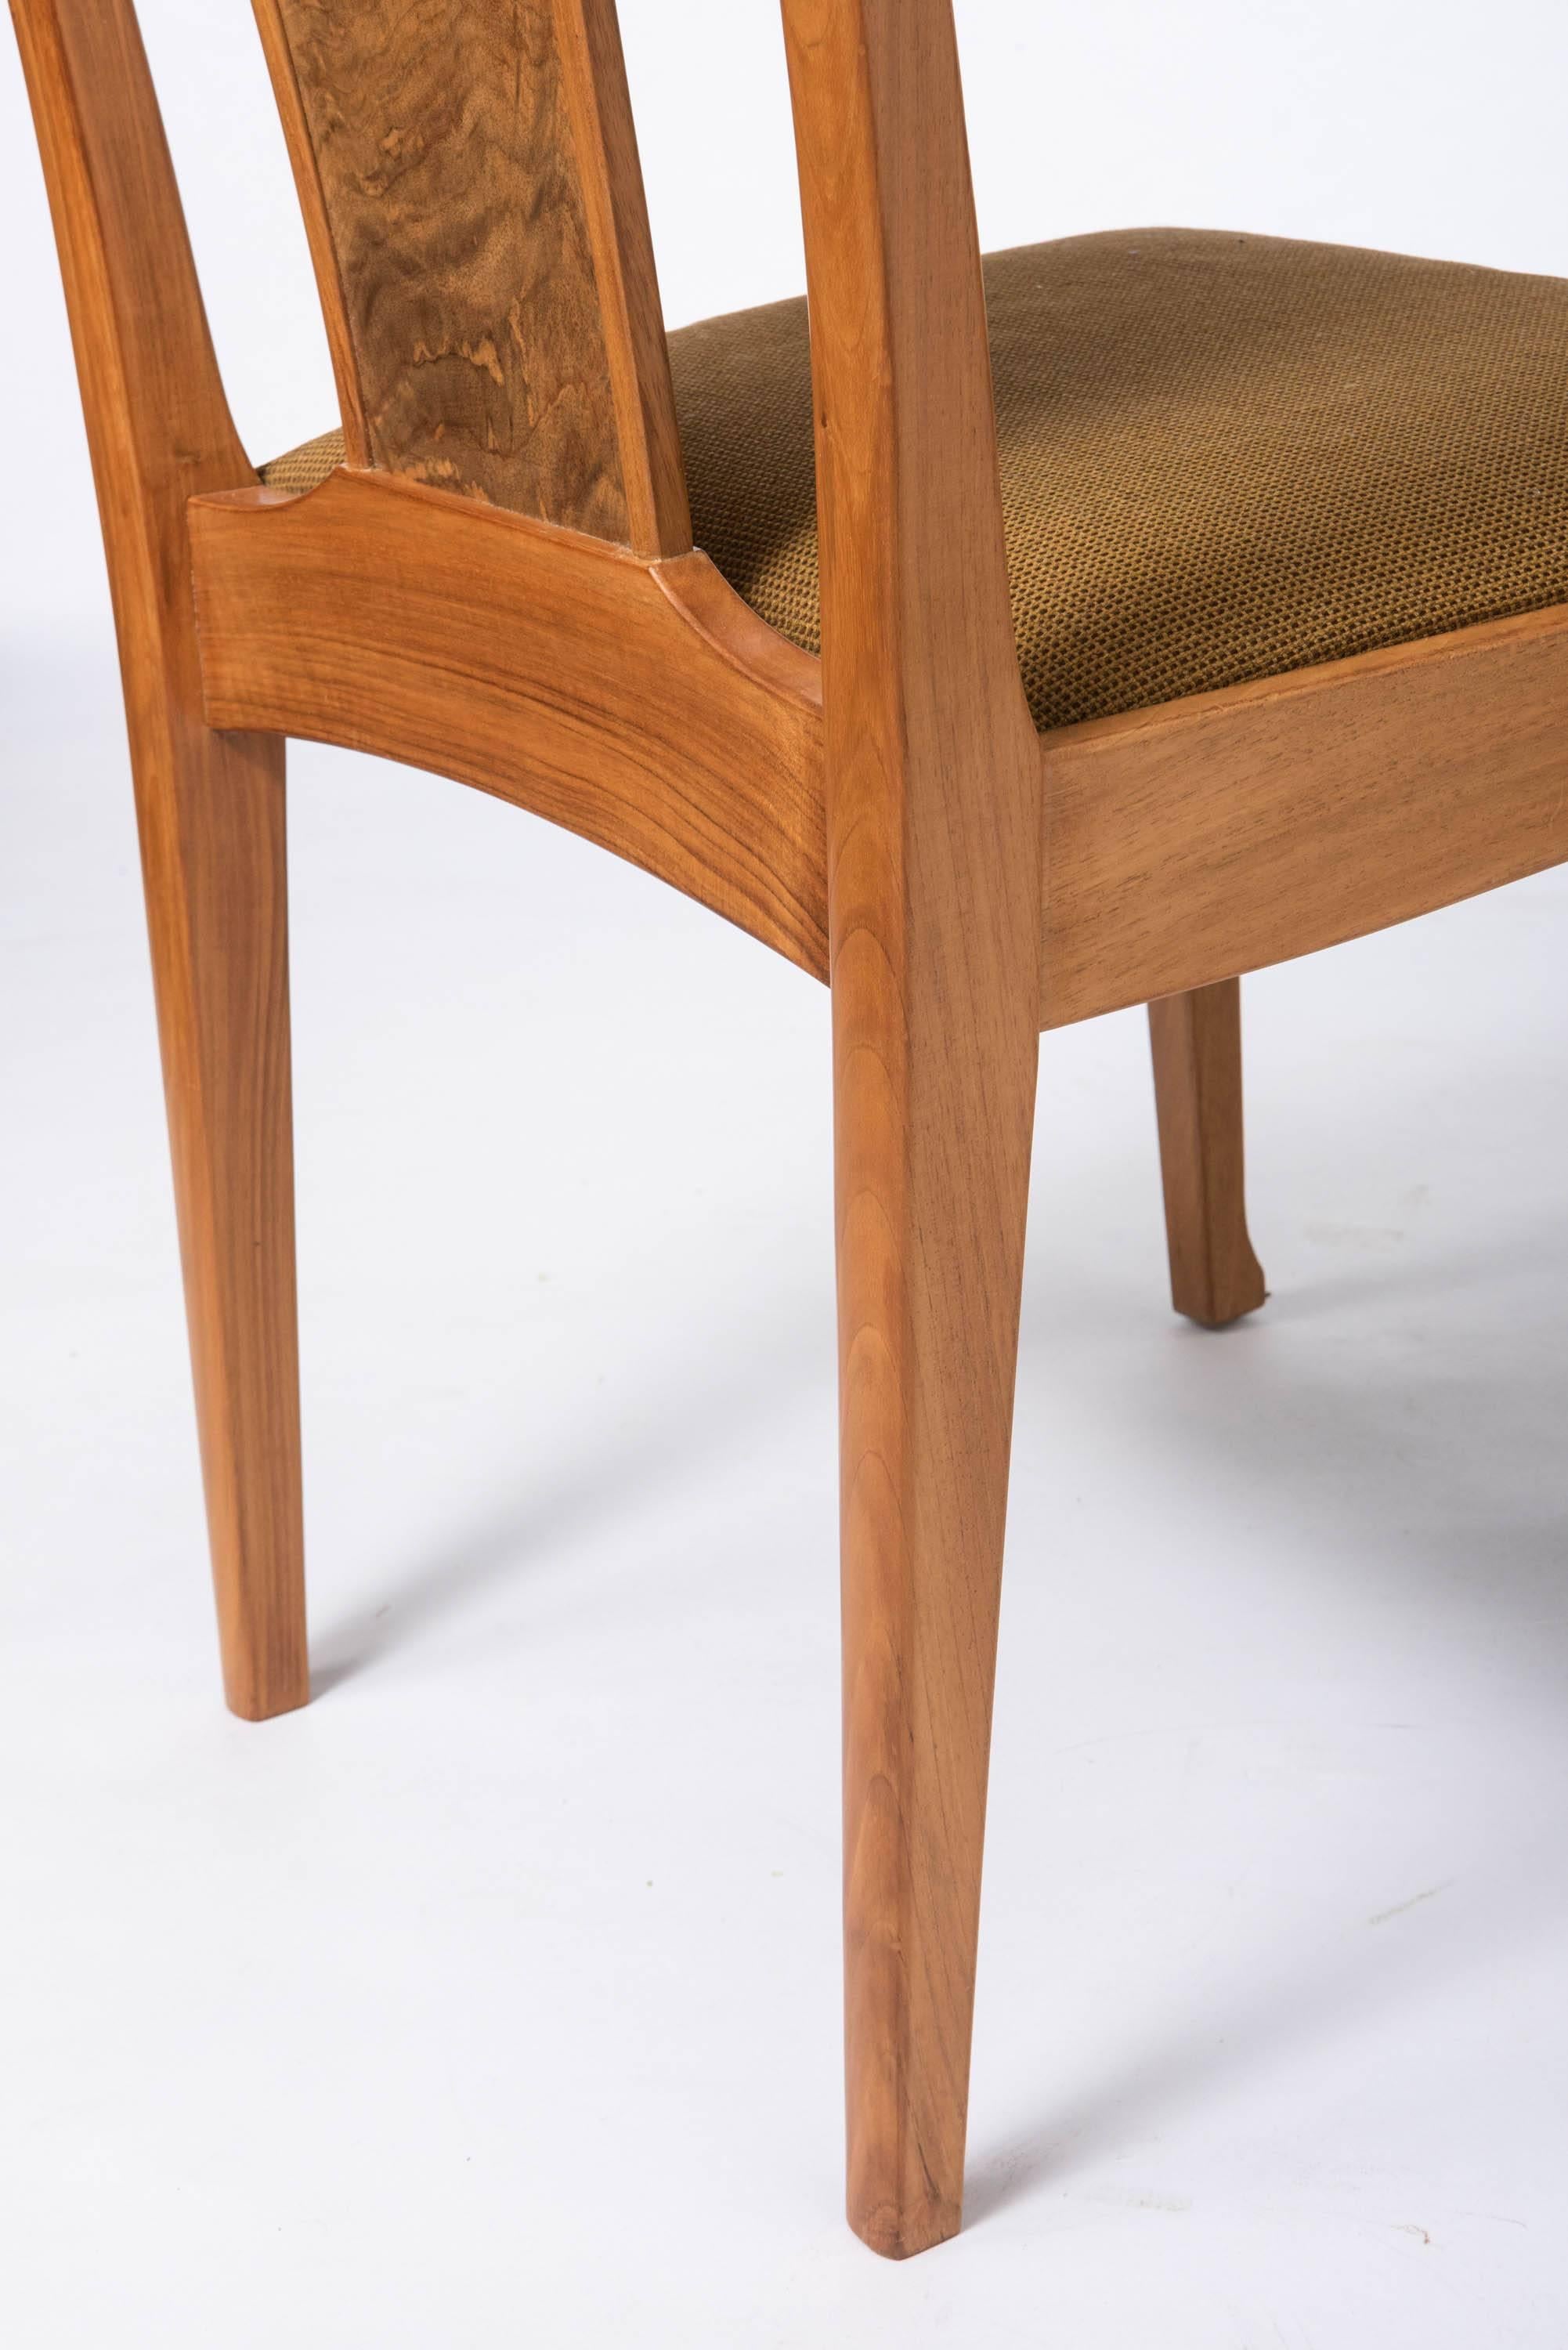 Pair of English Walnut Chairs by Edward Barnsley, England, circa 1969 For Sale 4